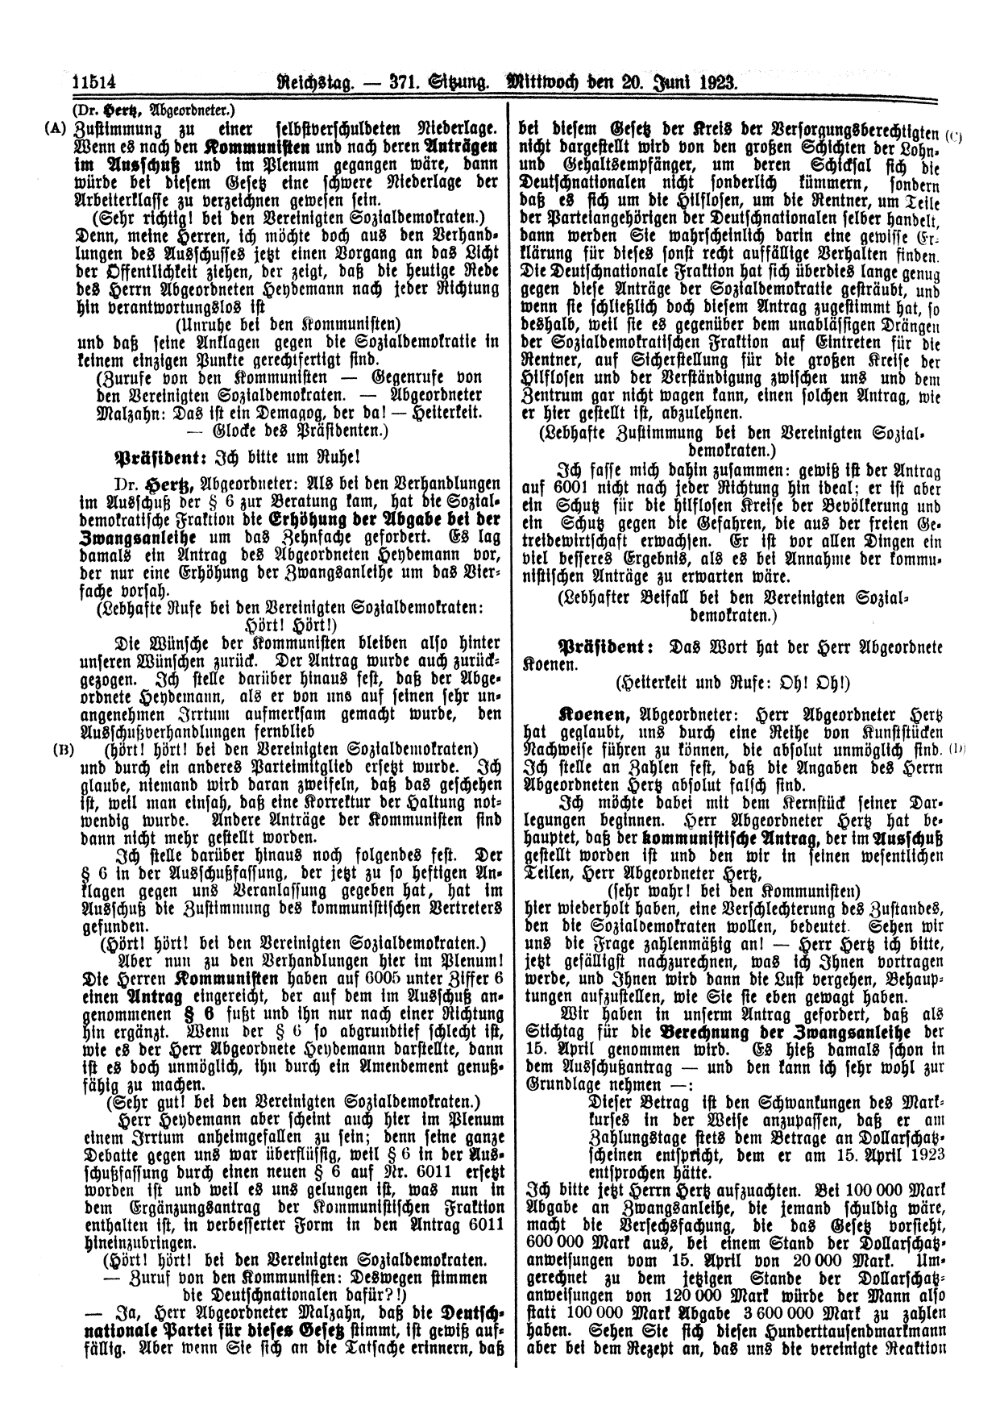 Scan of page 11514